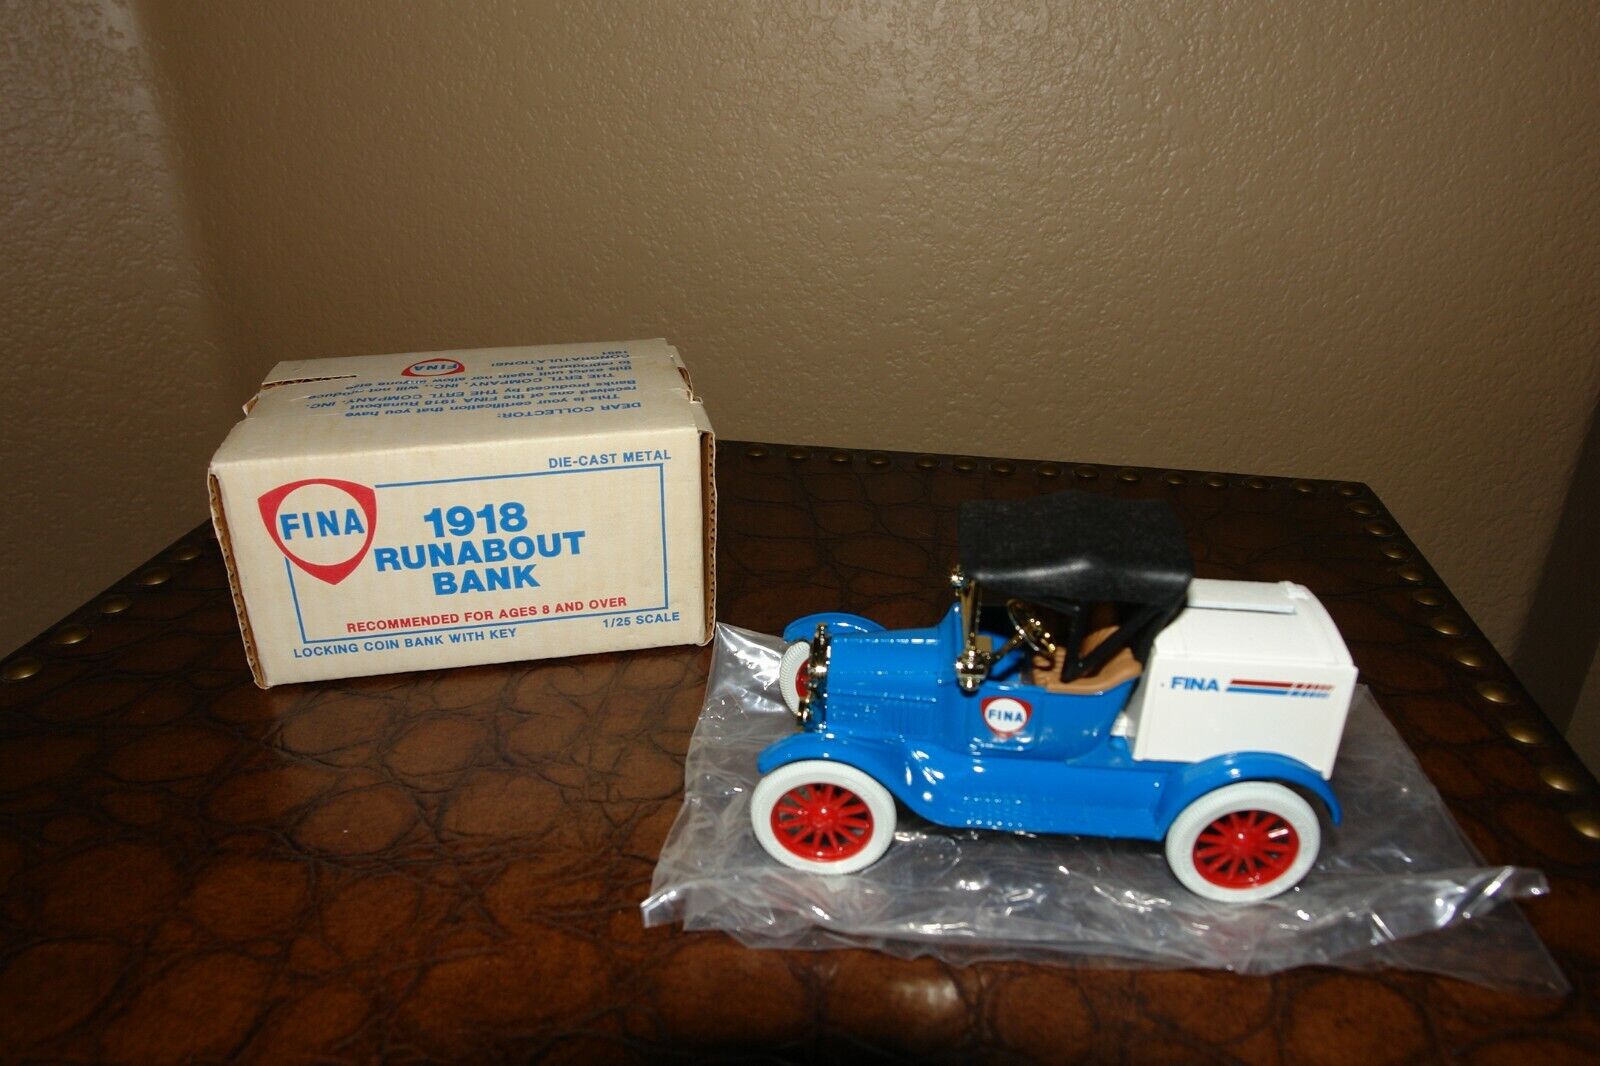 Ertl FINA 1918 Runabout Bank Diecast Model, Pre-owned